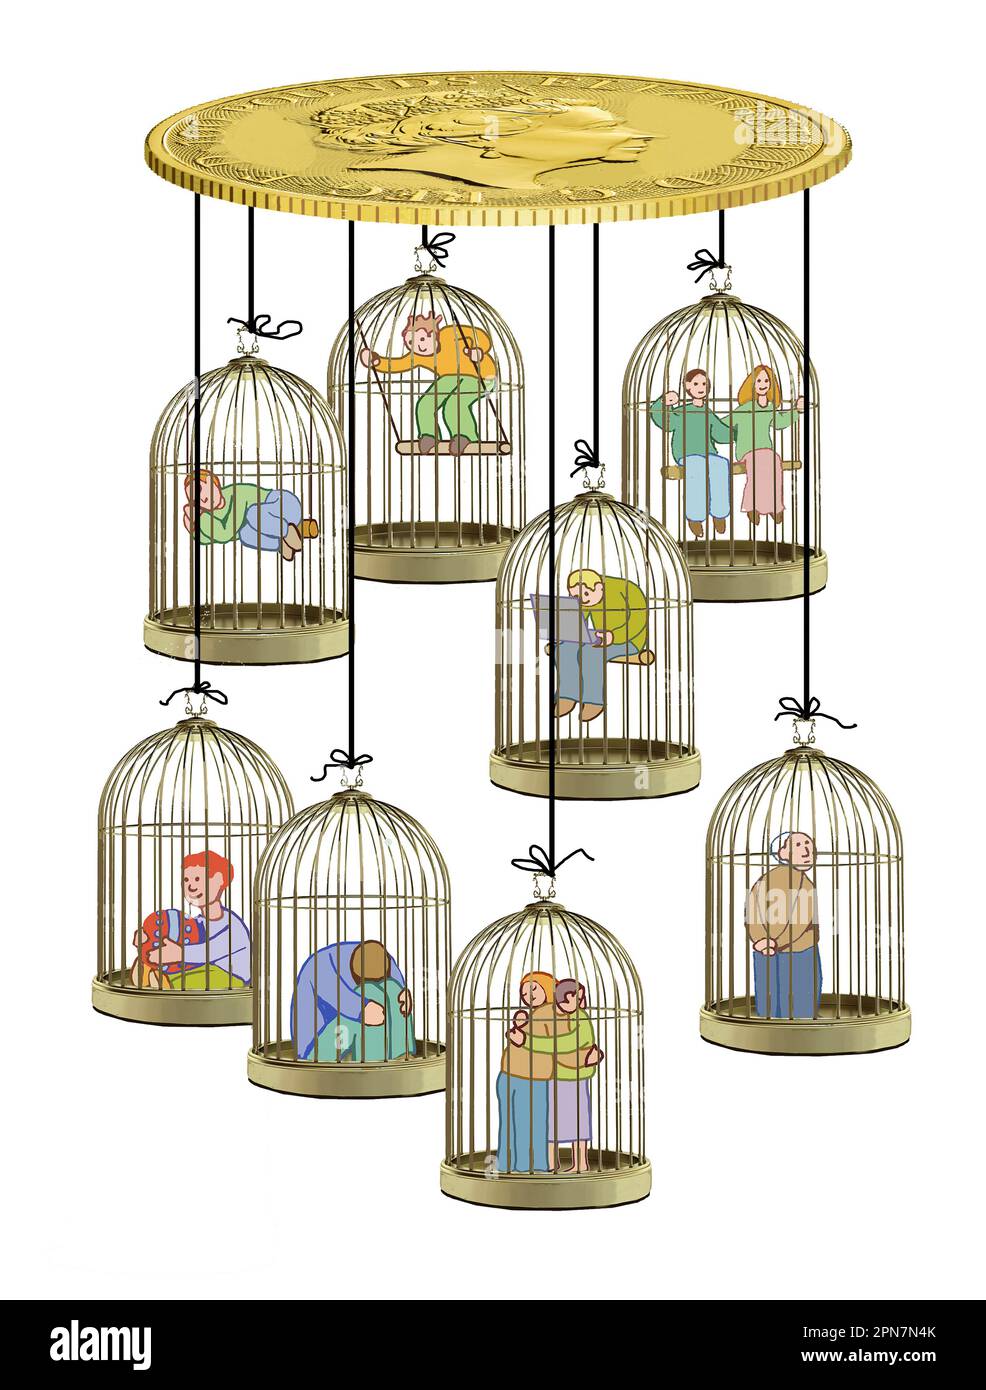 attached to a large coin there are cages with various types of people like a carousel for children, a metaphor for the deprivation of freedom within a Stock Photo